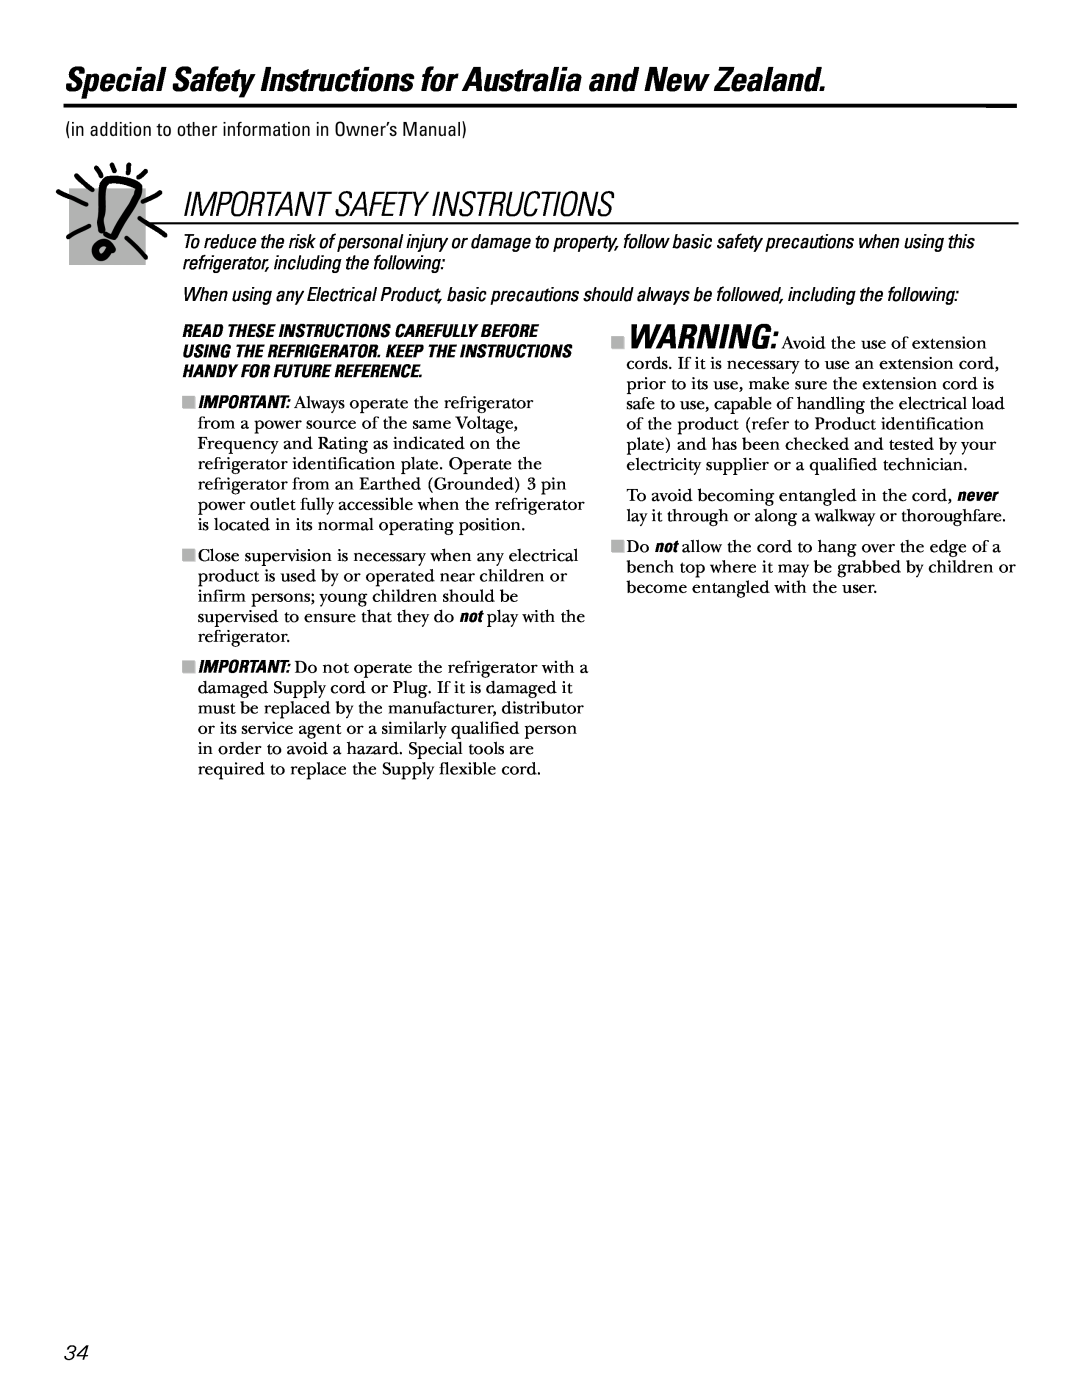 GE 200D2600P031 Special Safety Instructions for Australia and New Zealand, Important Safety Instructions 